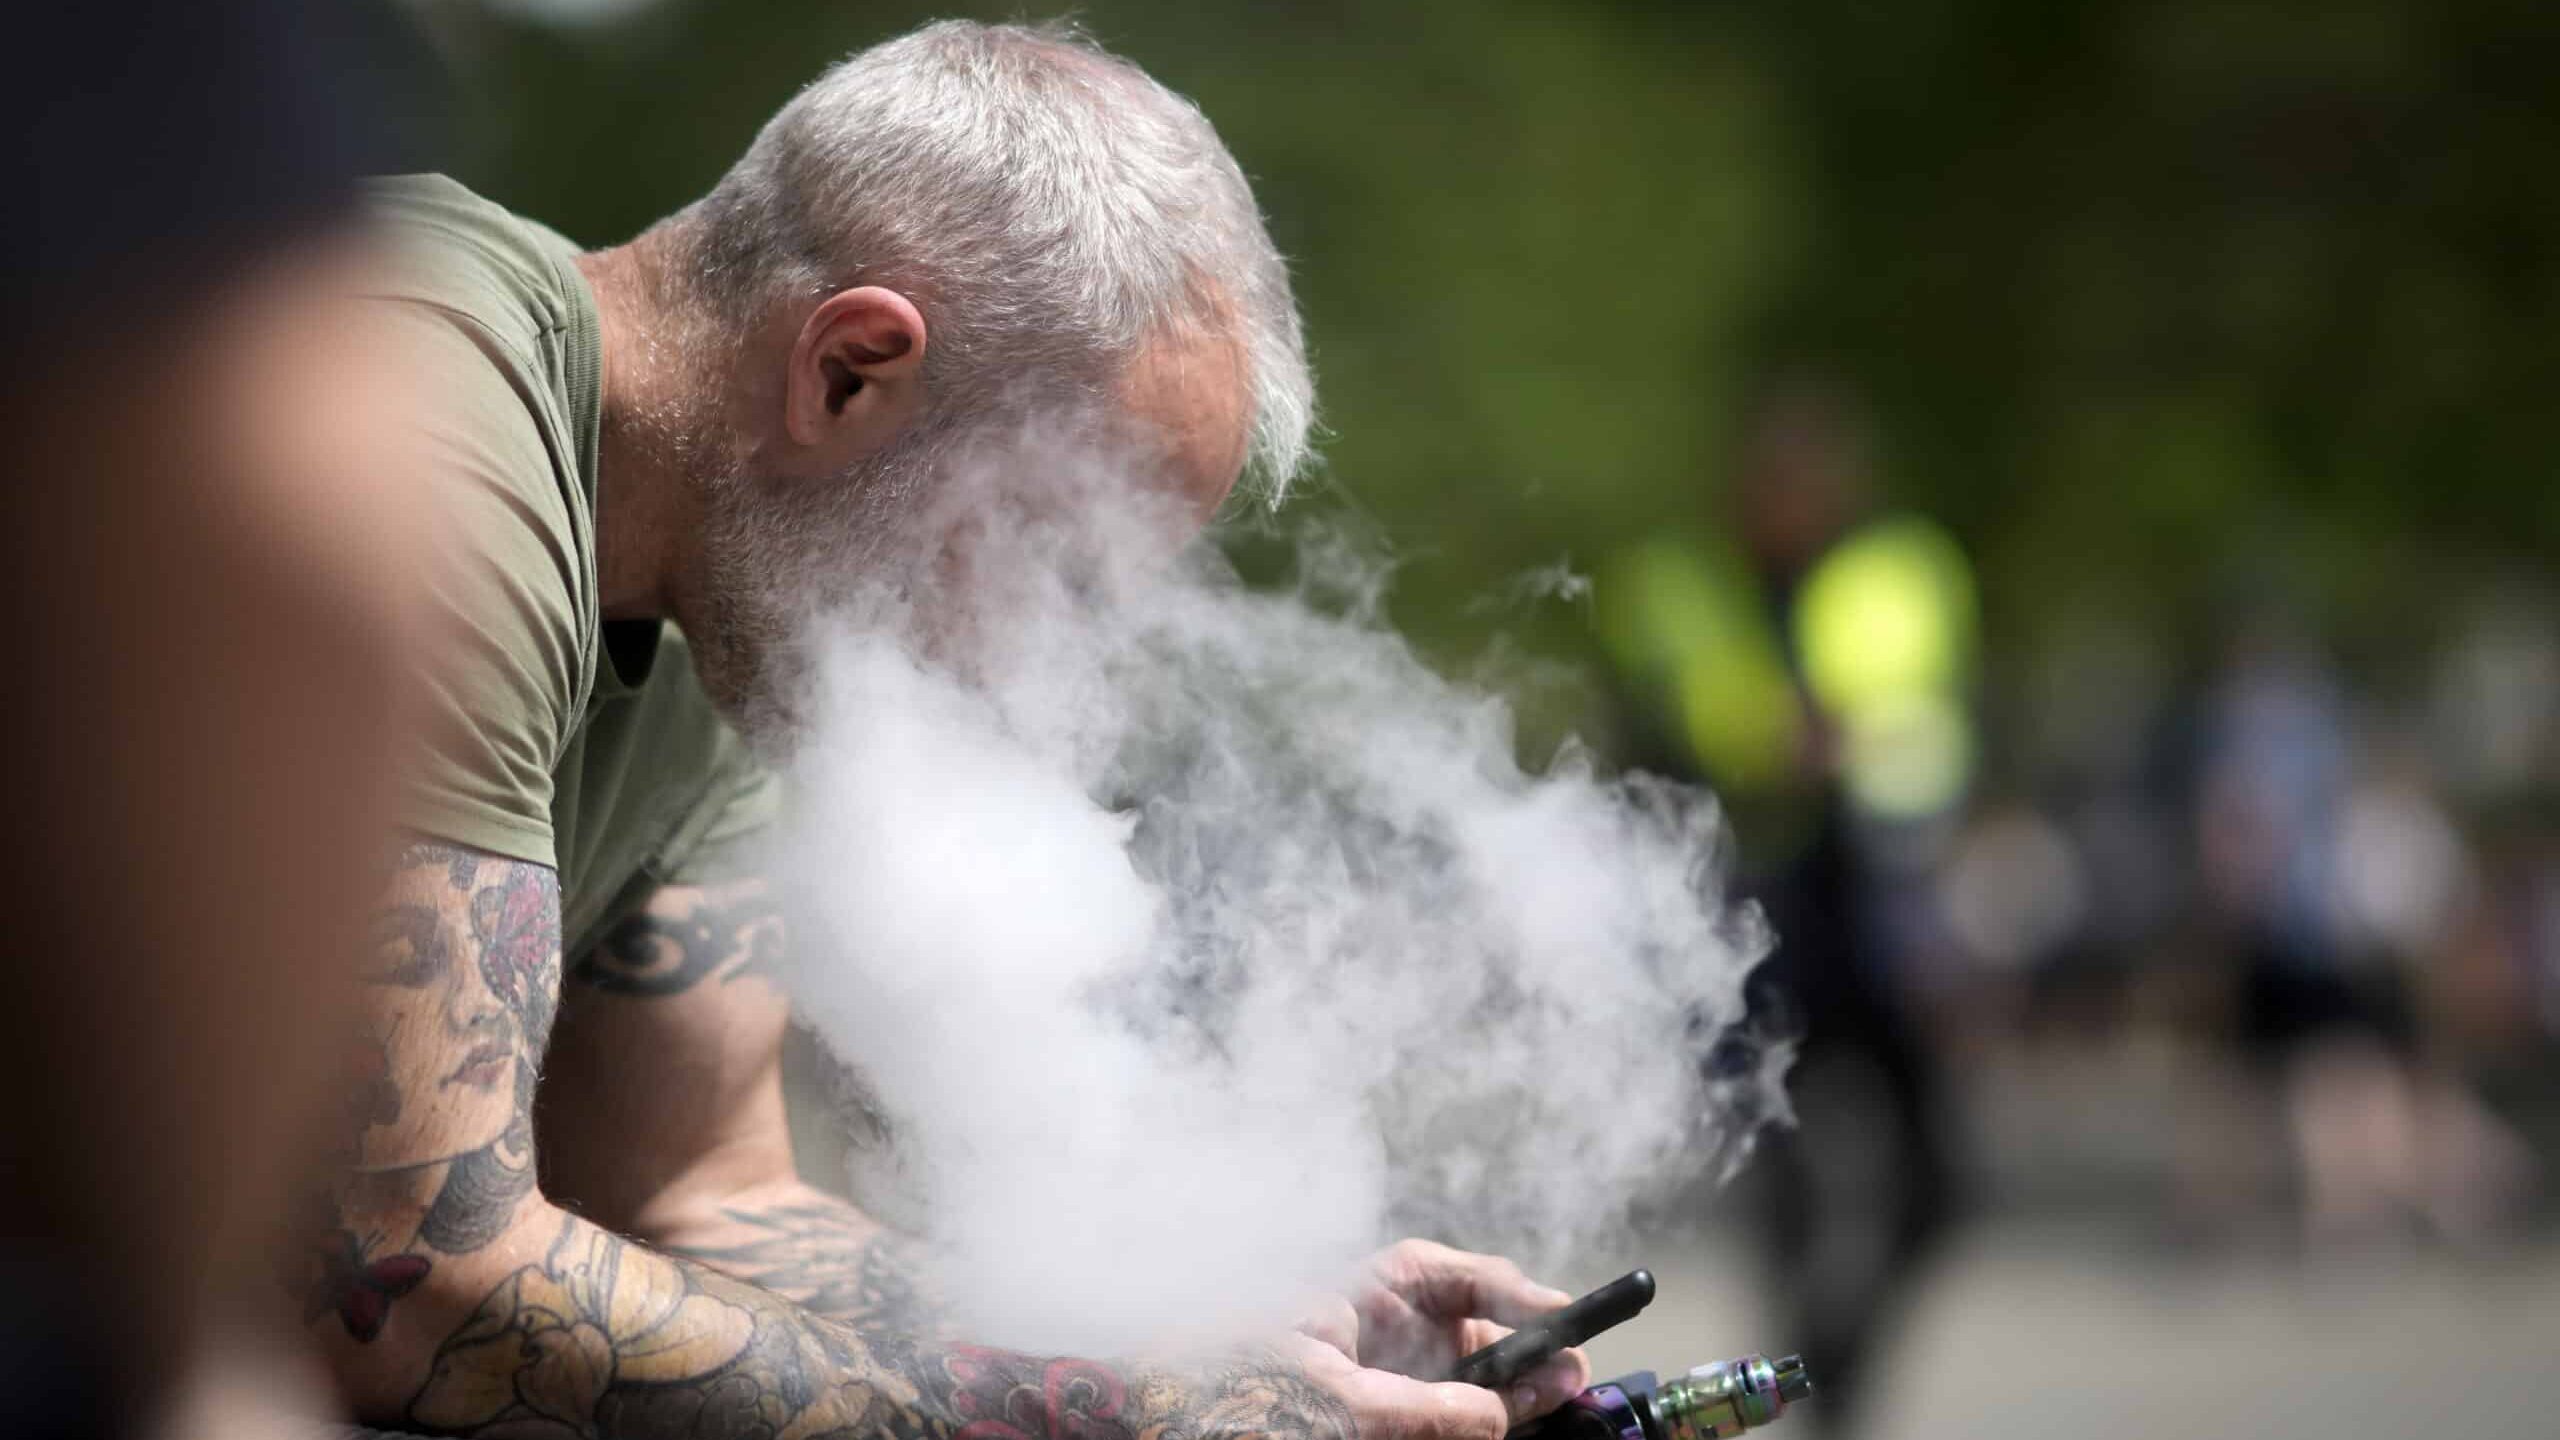 MANCHESTER, ENGLAND - MAY 30: A man smokes a vape device on May 30, 2023 in Manchester, England. The British prime minister has tried to cast a harsh light on "unacceptable" marketing of vaping products to teenagers and children, saying his government would close a loophole that allows retailers to give free vape samples to children.